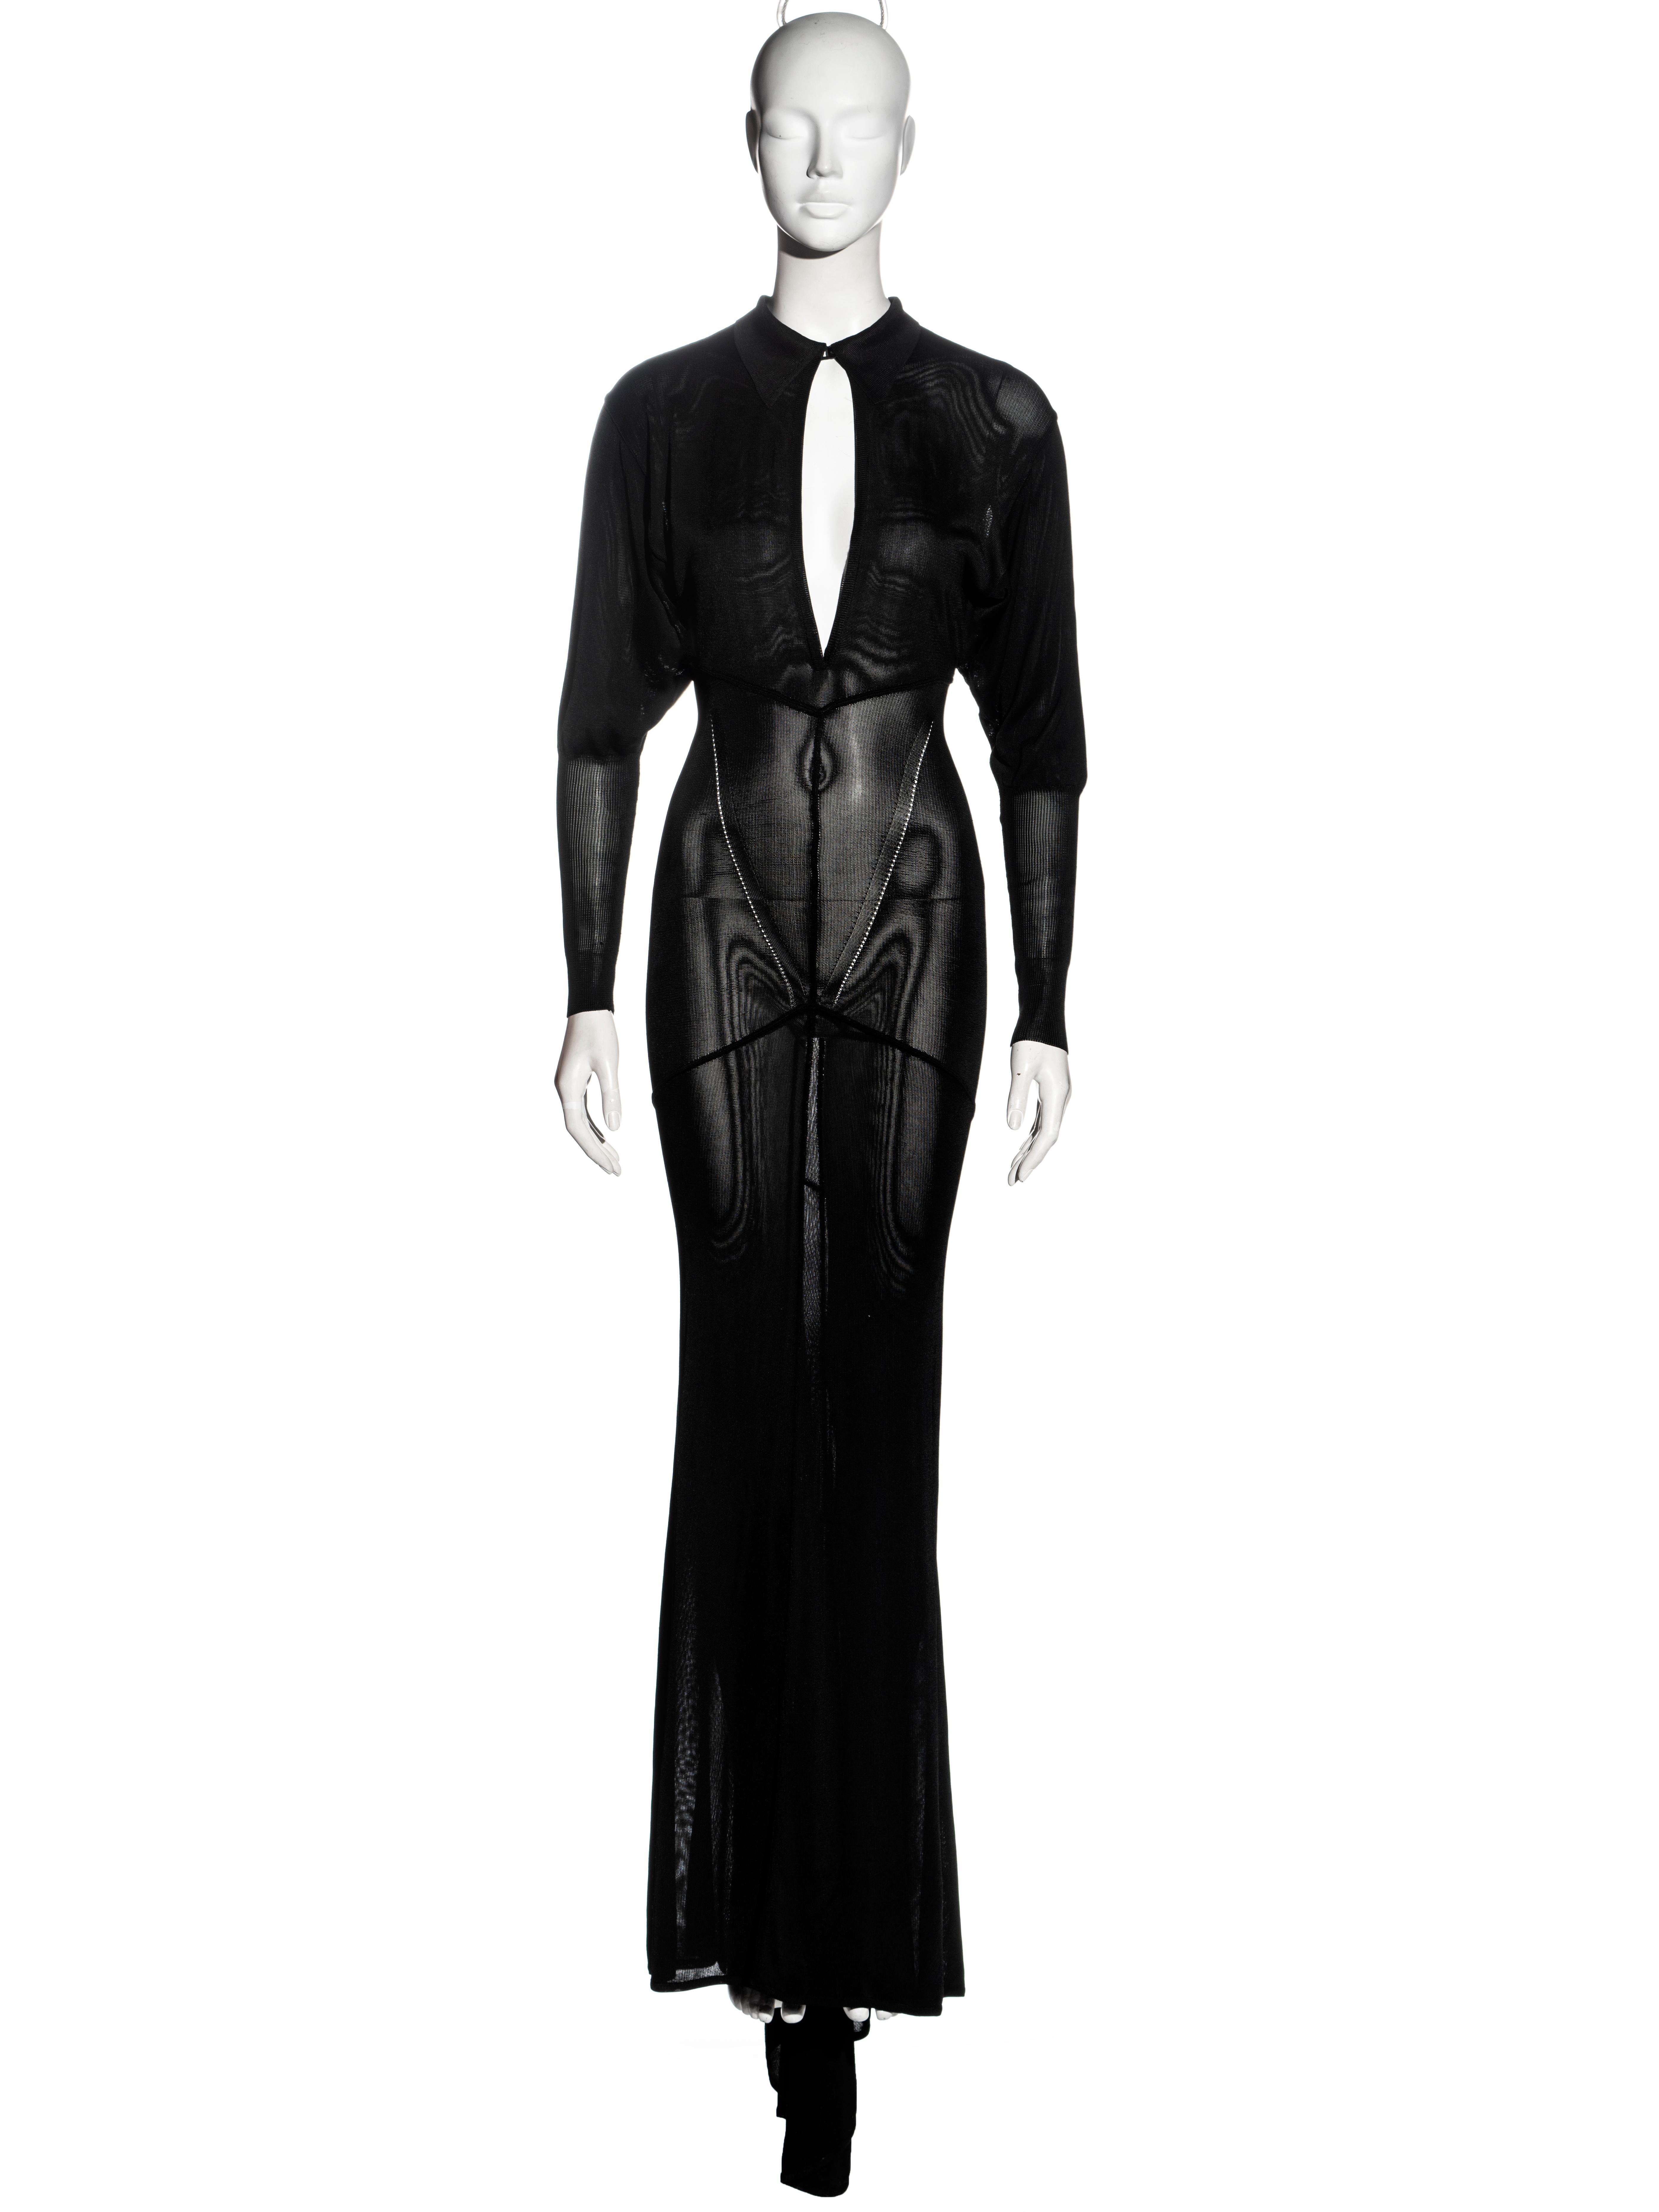 ▪ Azzedine Alaia evening dress
▪ Black acetate knit 
▪ Button-up collar with low-cut neckline 
▪ Leg of mutton sleeves
▪ Open-knit detail on the hips 
▪ Floor-length skirt with train 
▪ Size Small
▪ Fall-Winter 1986
▪ 100% Acetate
▪ Made in Italy